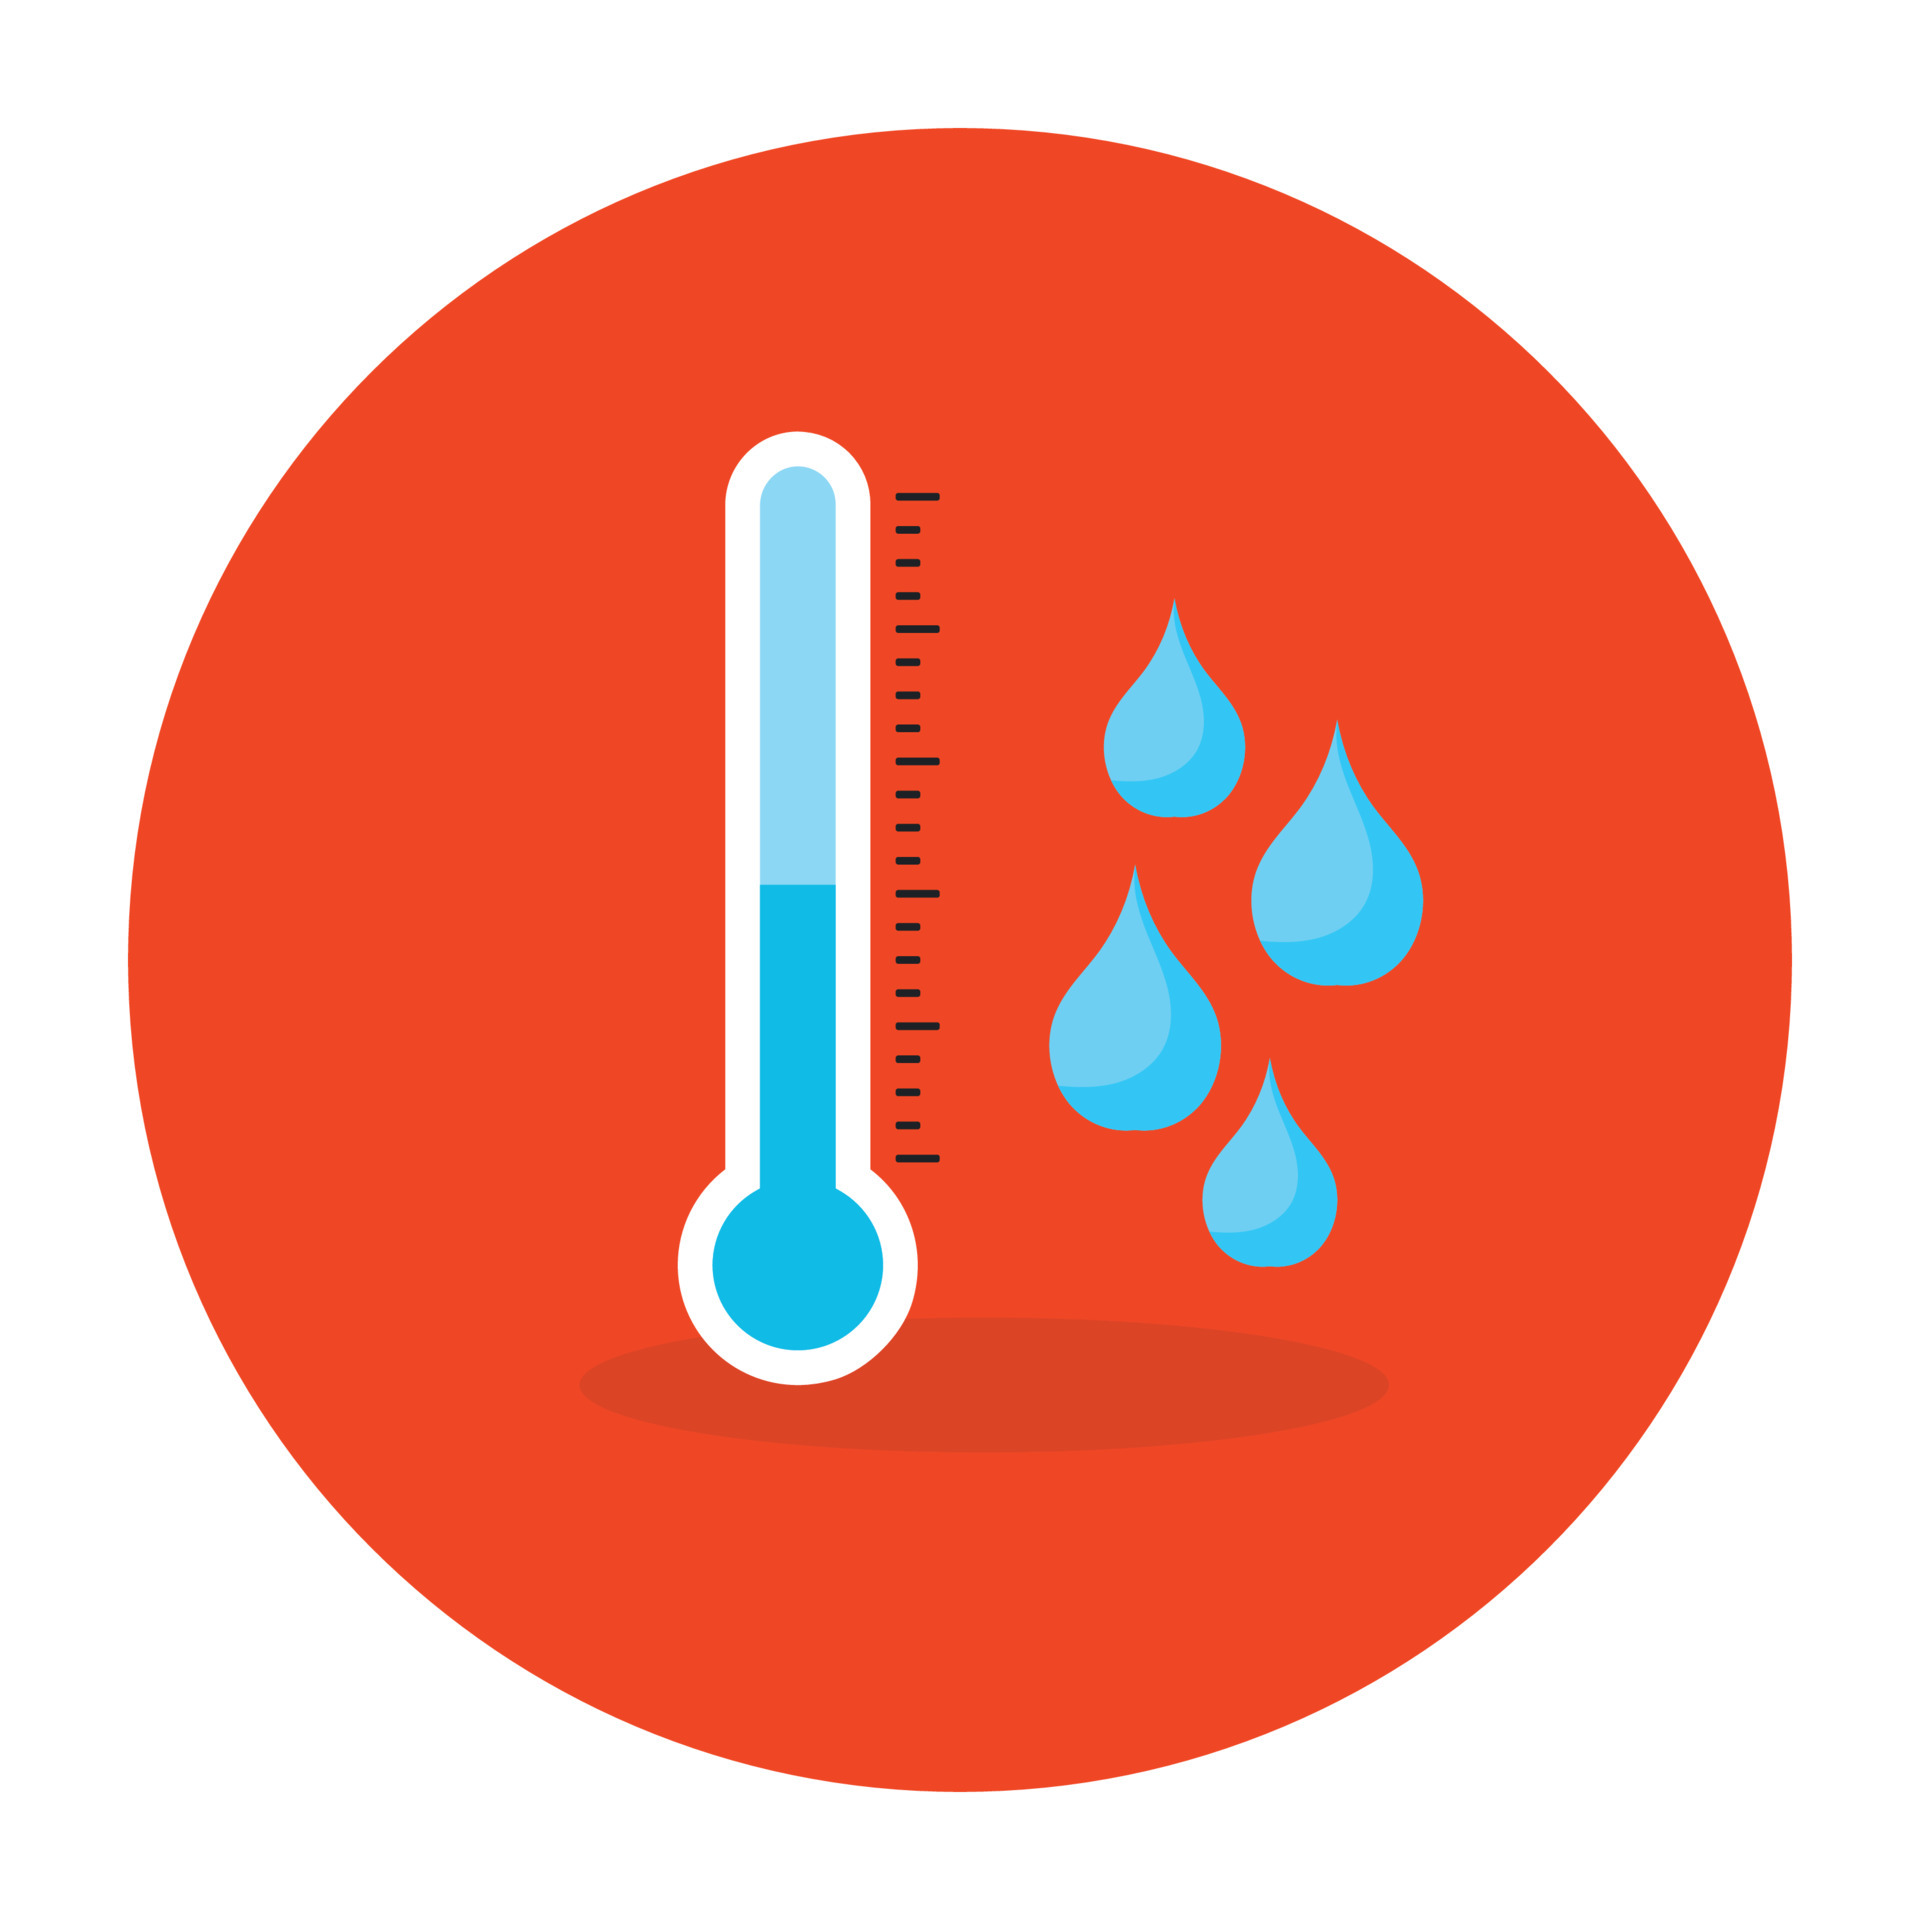 https://static.vecteezy.com/system/resources/previews/006/746/819/original/colorful-design-icon-of-temperature-humidity-vector.jpg